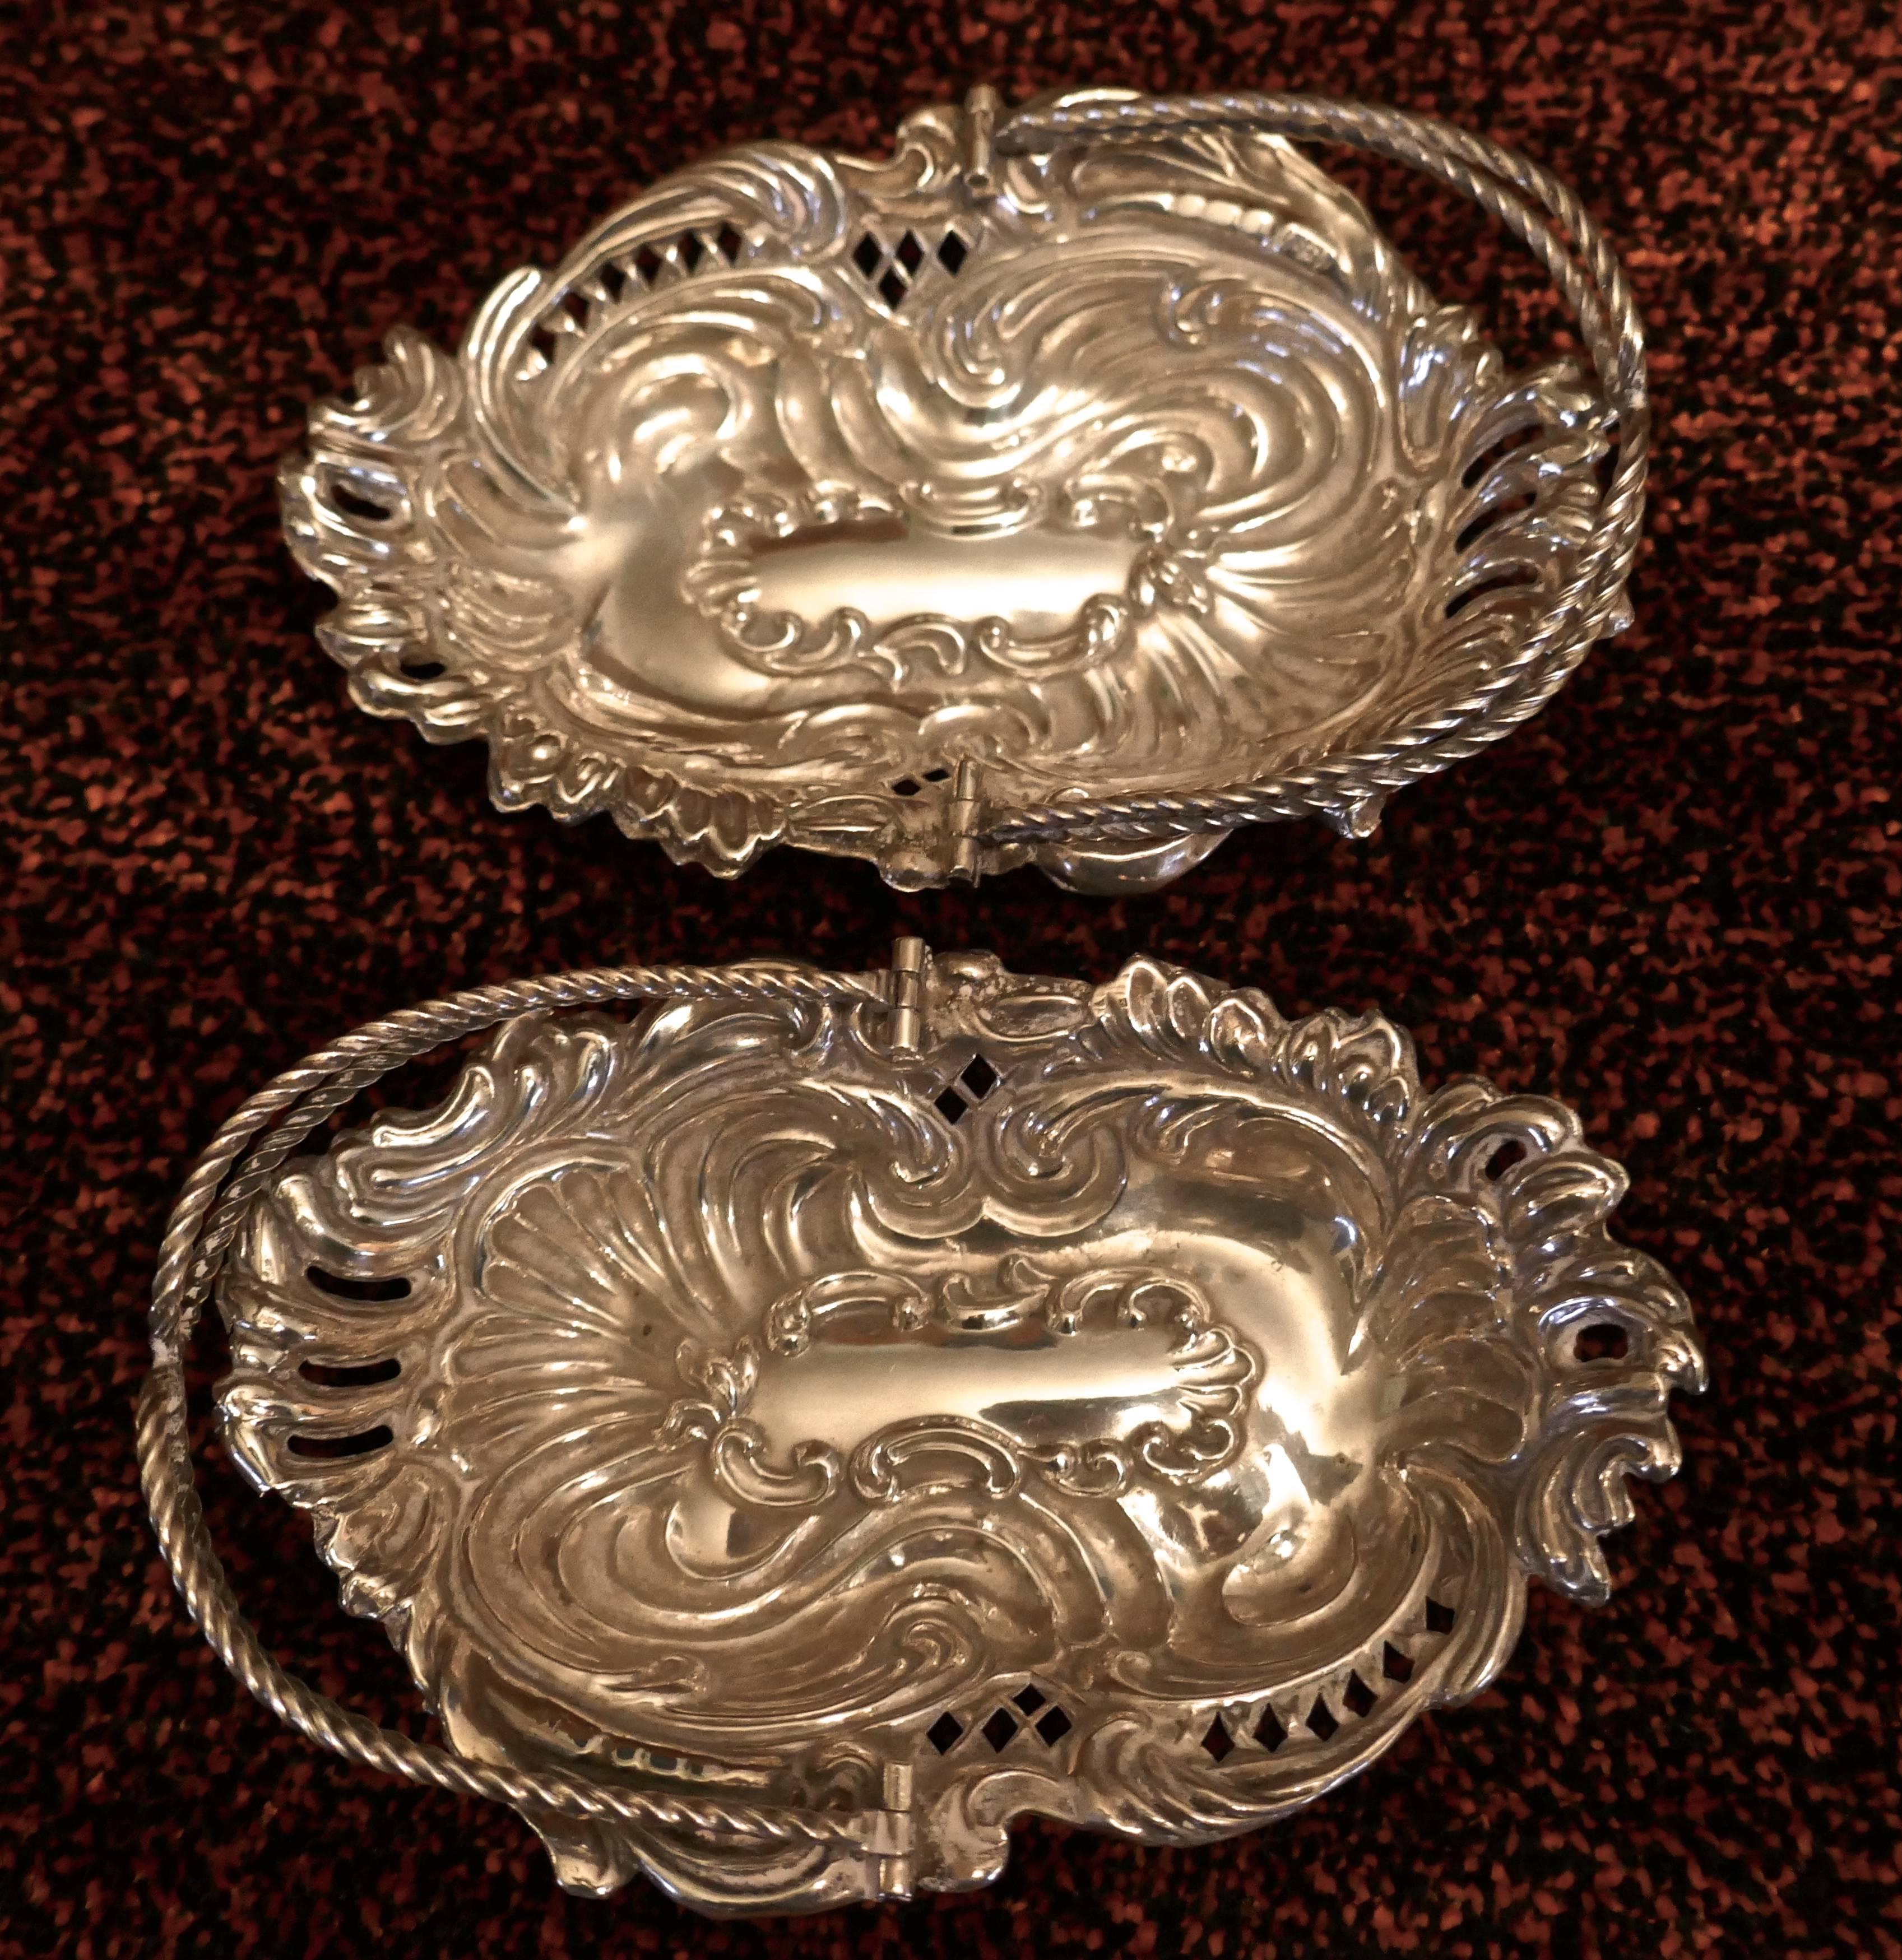 Beautifully cast with a pierced acanthus decoration, each with a double rope twist articulated handle
The baskets are in excellent condition, crisp decoration with no dents or damage
or damage.
A lovely example of High Victorian Style
Weight 70